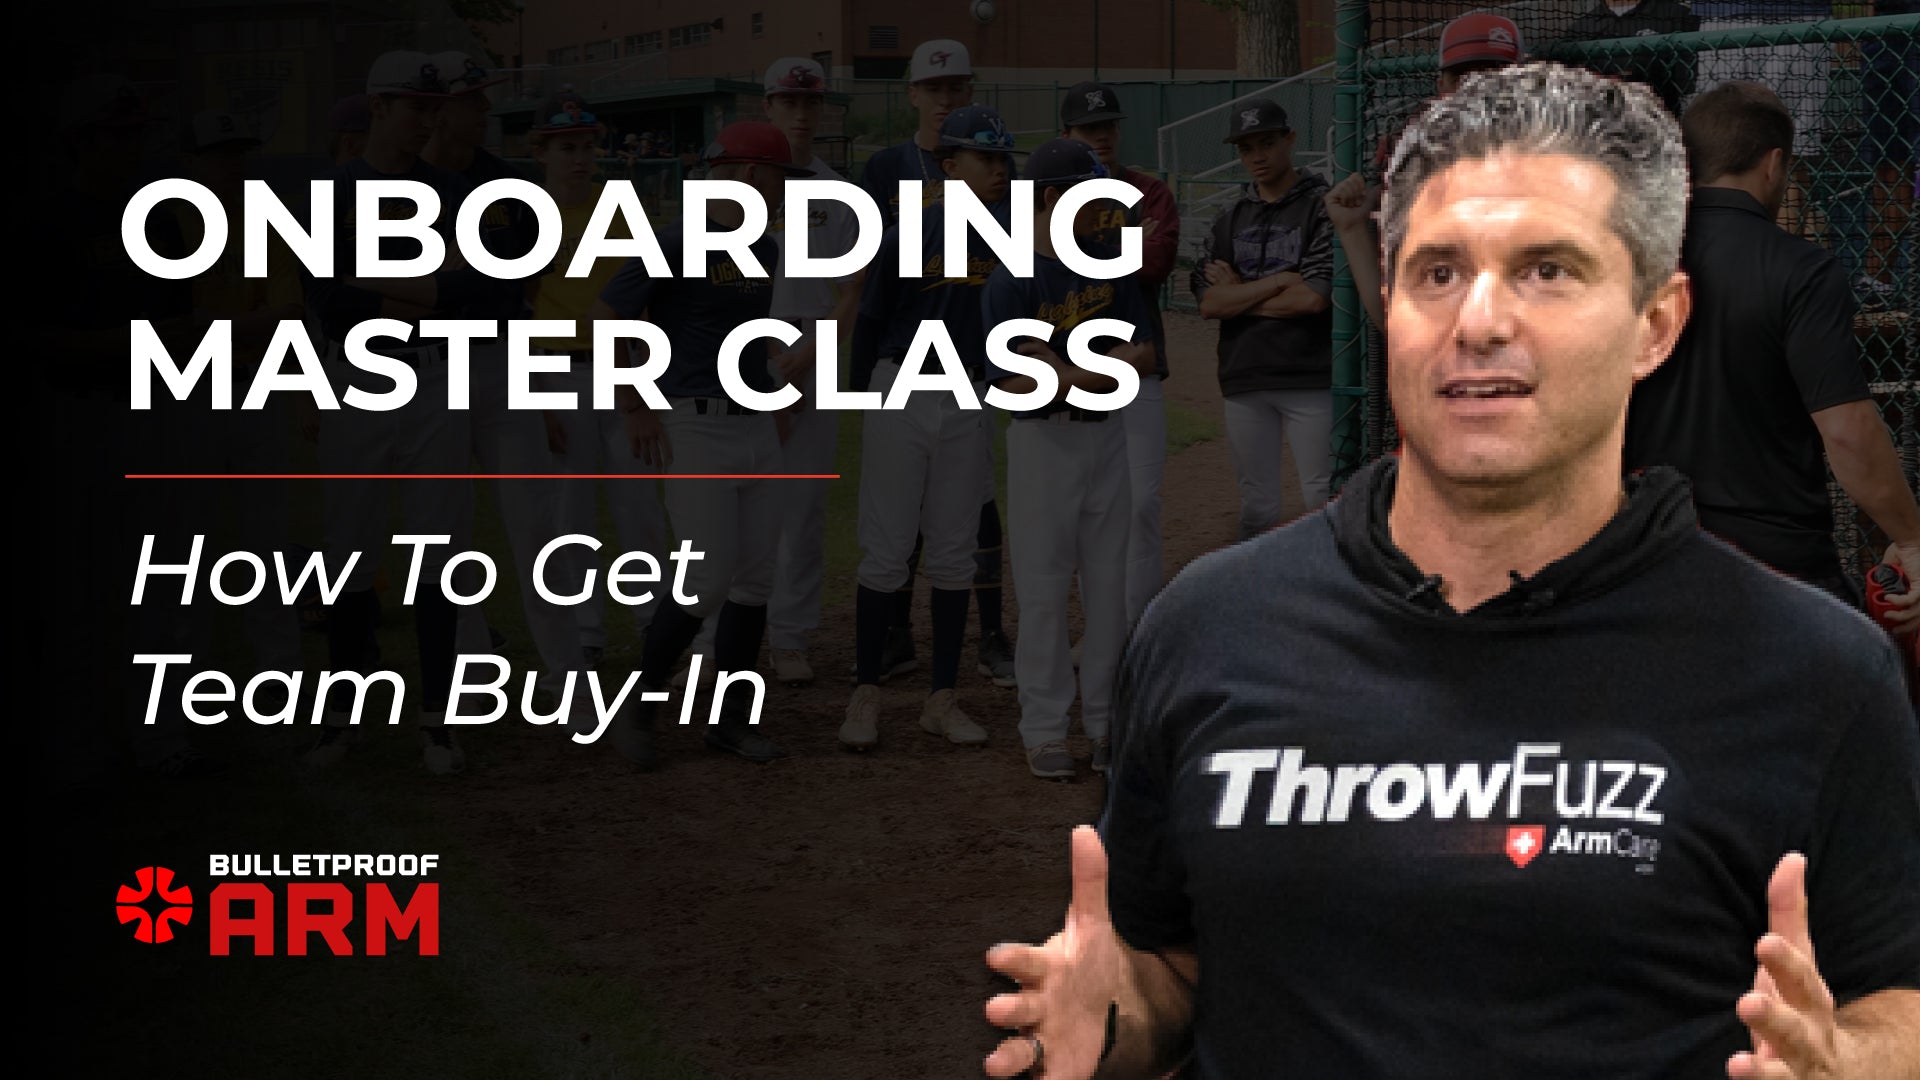 Bulletproof Arm Series - The Onboarding Master Class – How to Get Team Buy-In